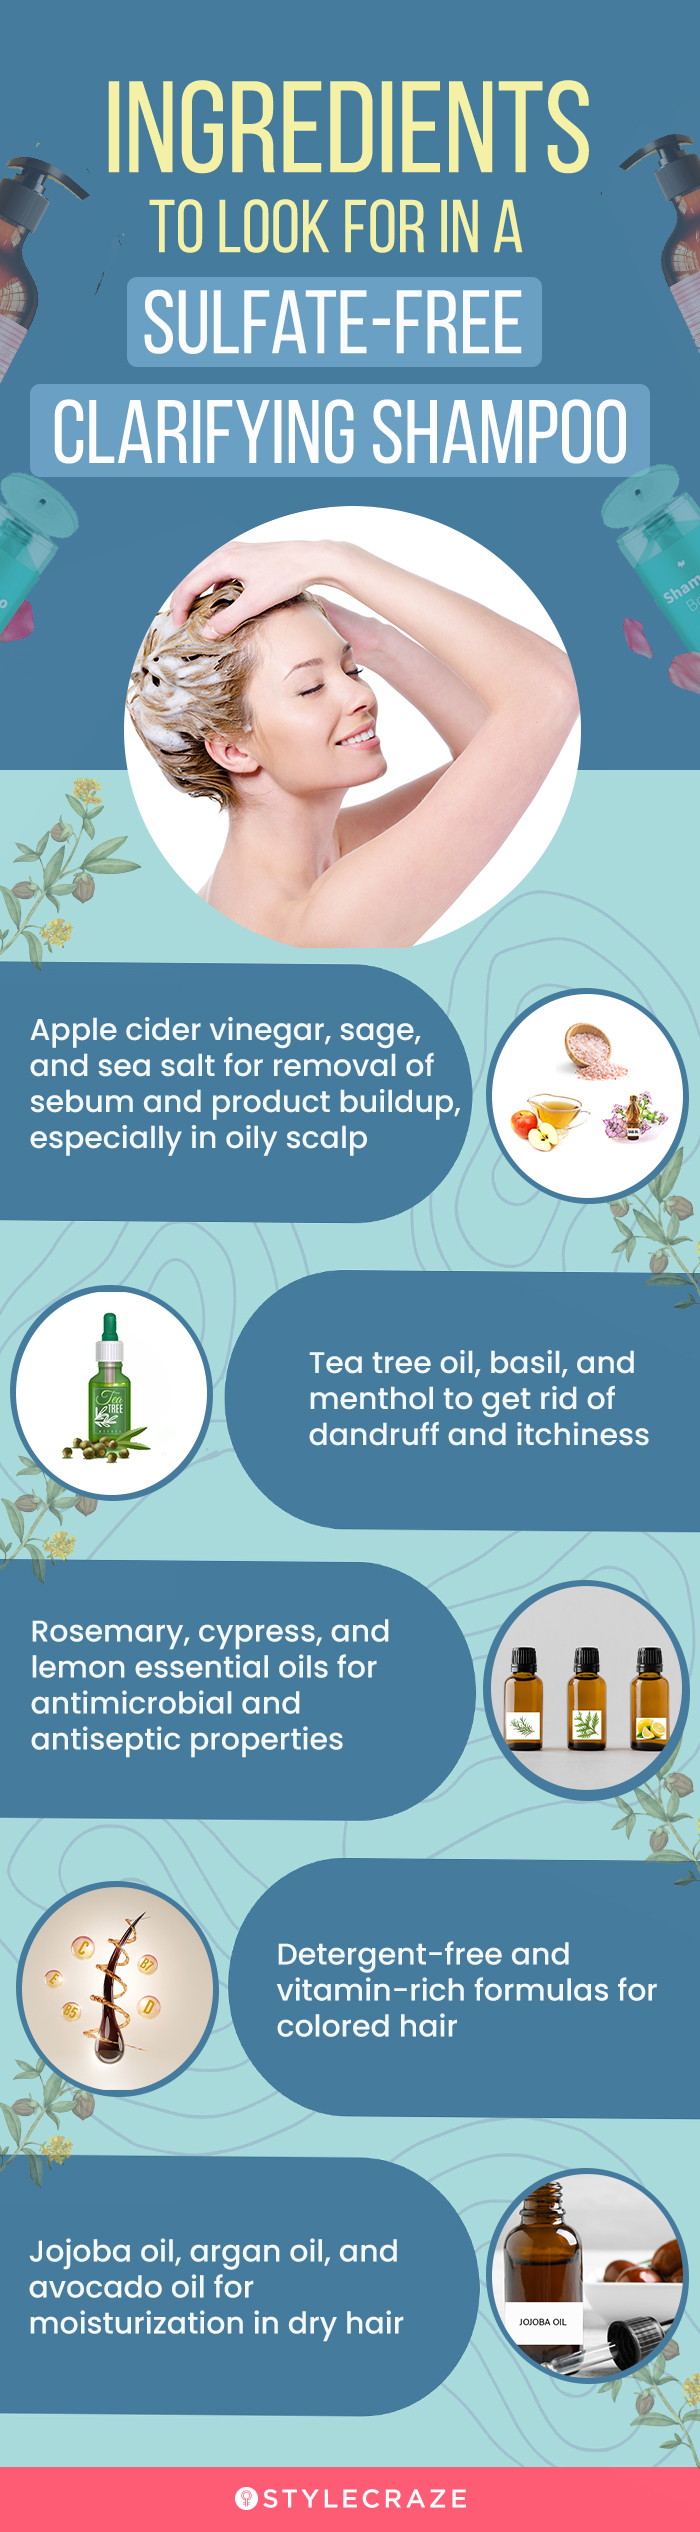 Ingredients To Look For In A Sulfate Free Shampoo [infographic]